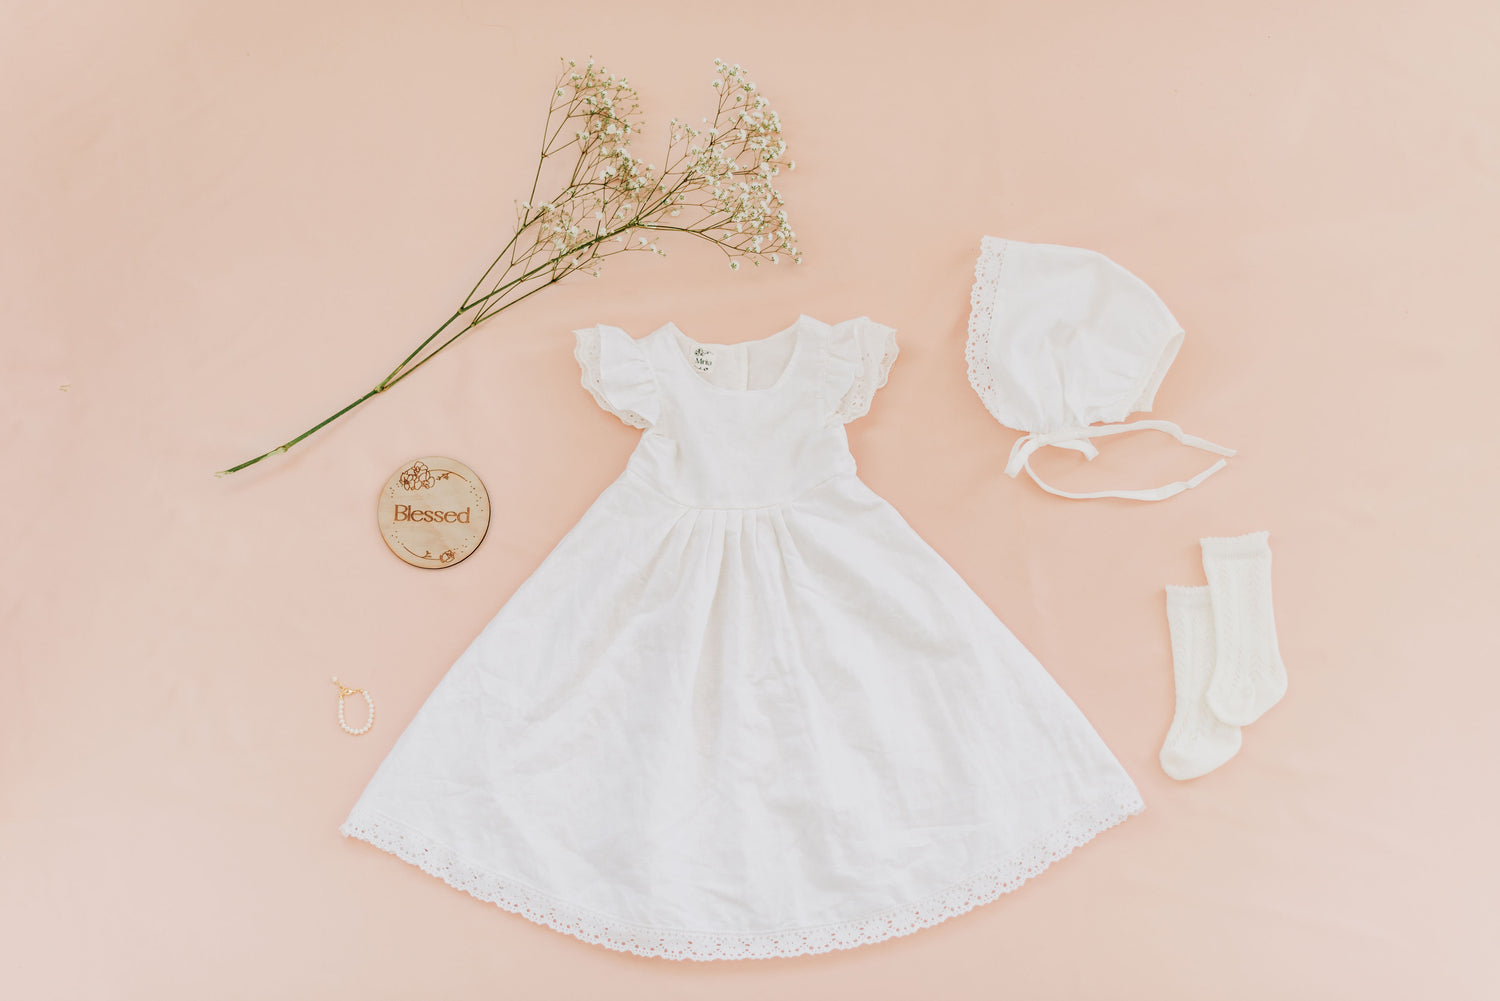 Flat lay with baby girl blessing dress, knit socks, and bonnet.